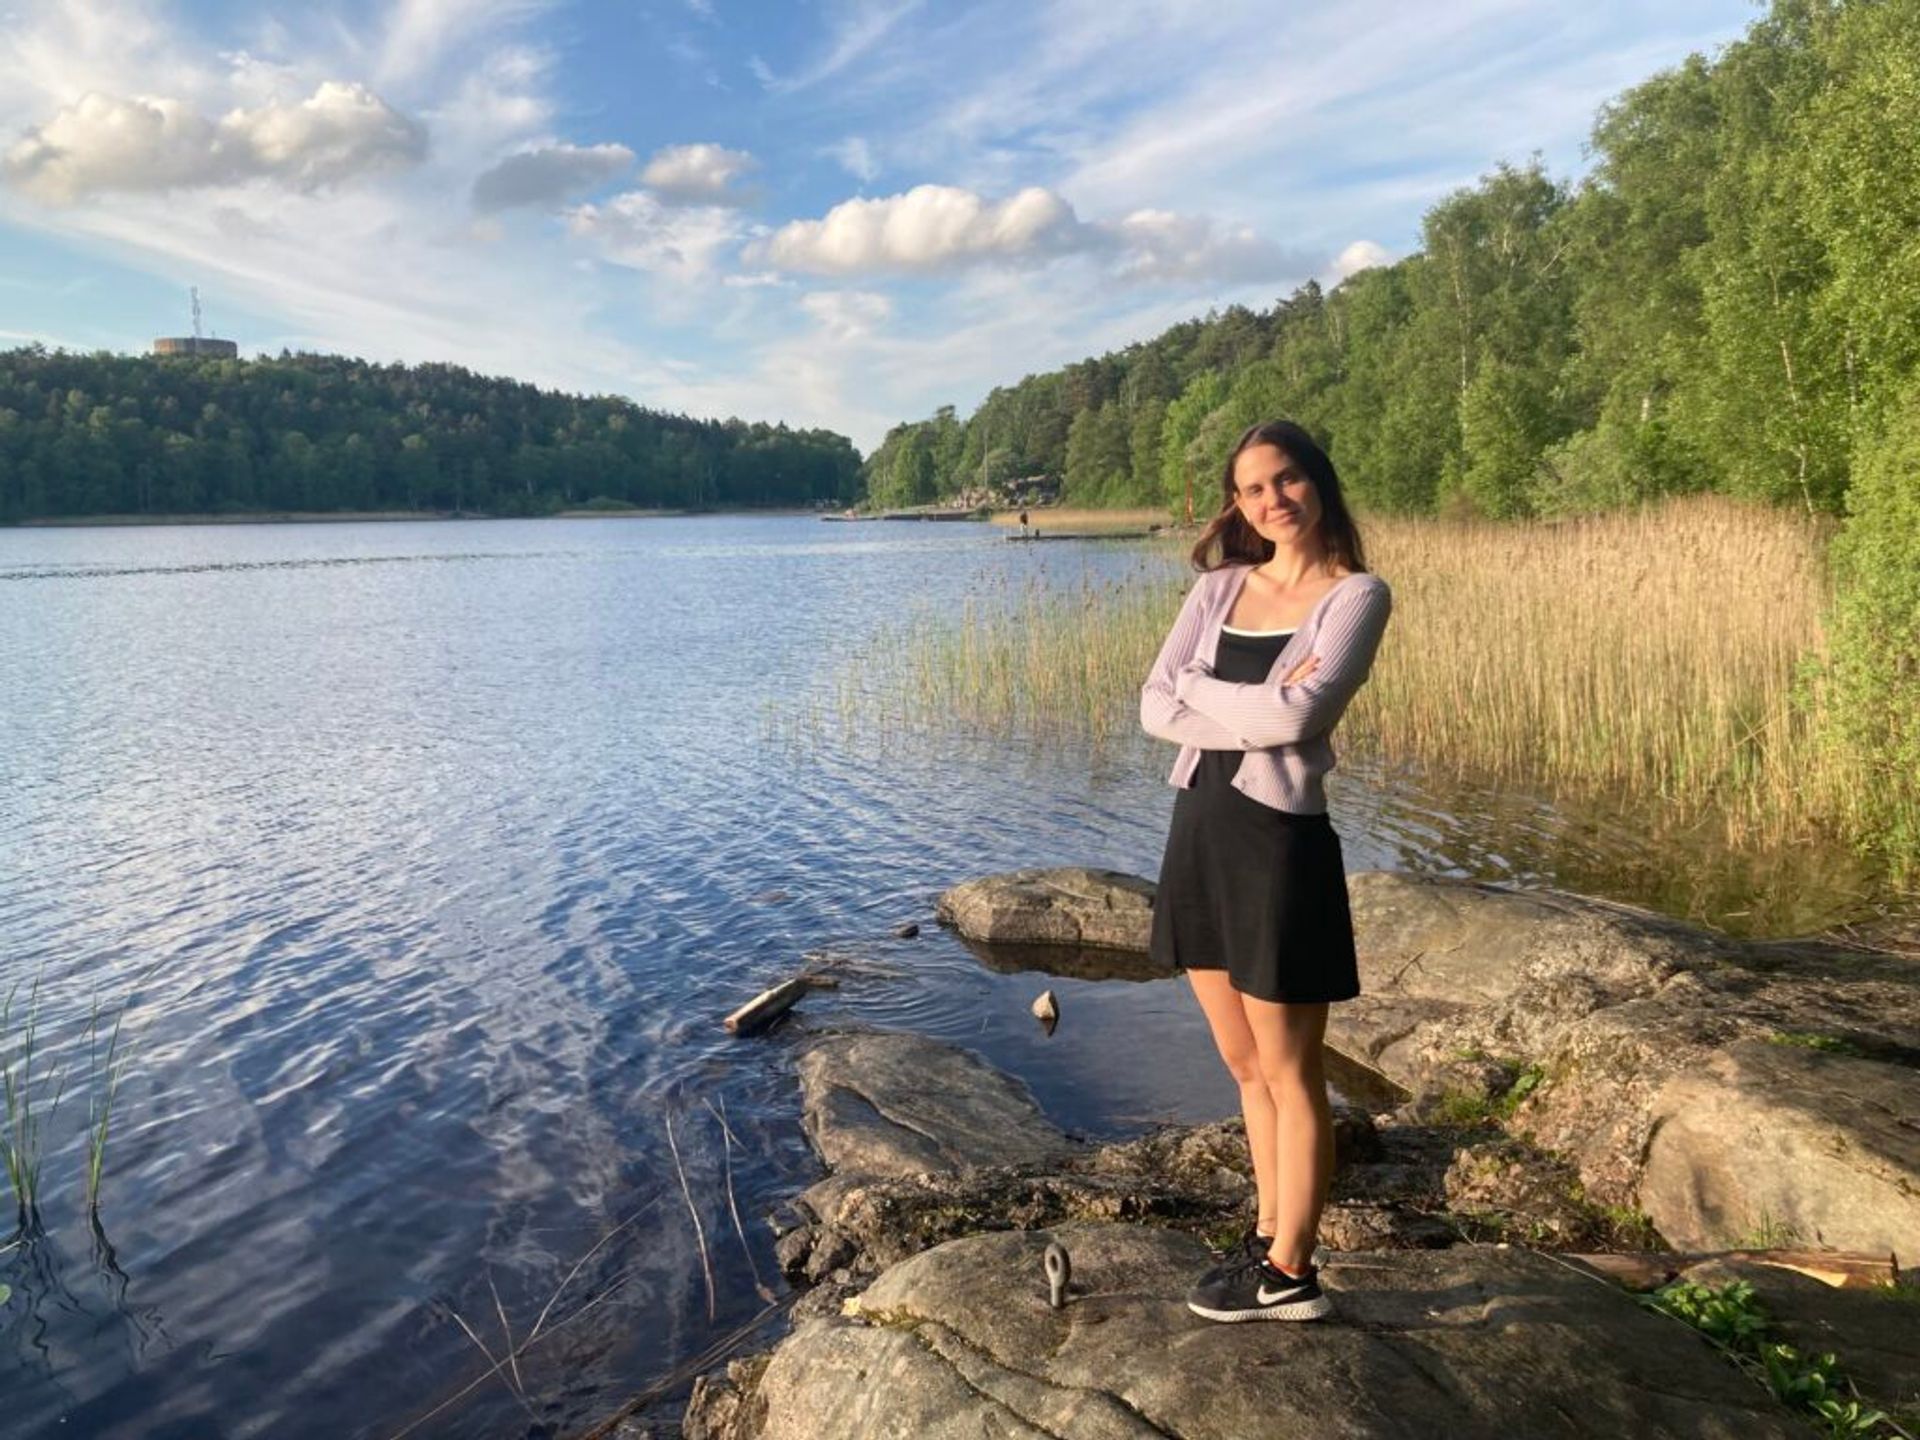 A woman with a contented smile stands by a lake, arms crossed, in a serene natural setting with calm waters, reeds, and a forested hill under a soft evening sky.